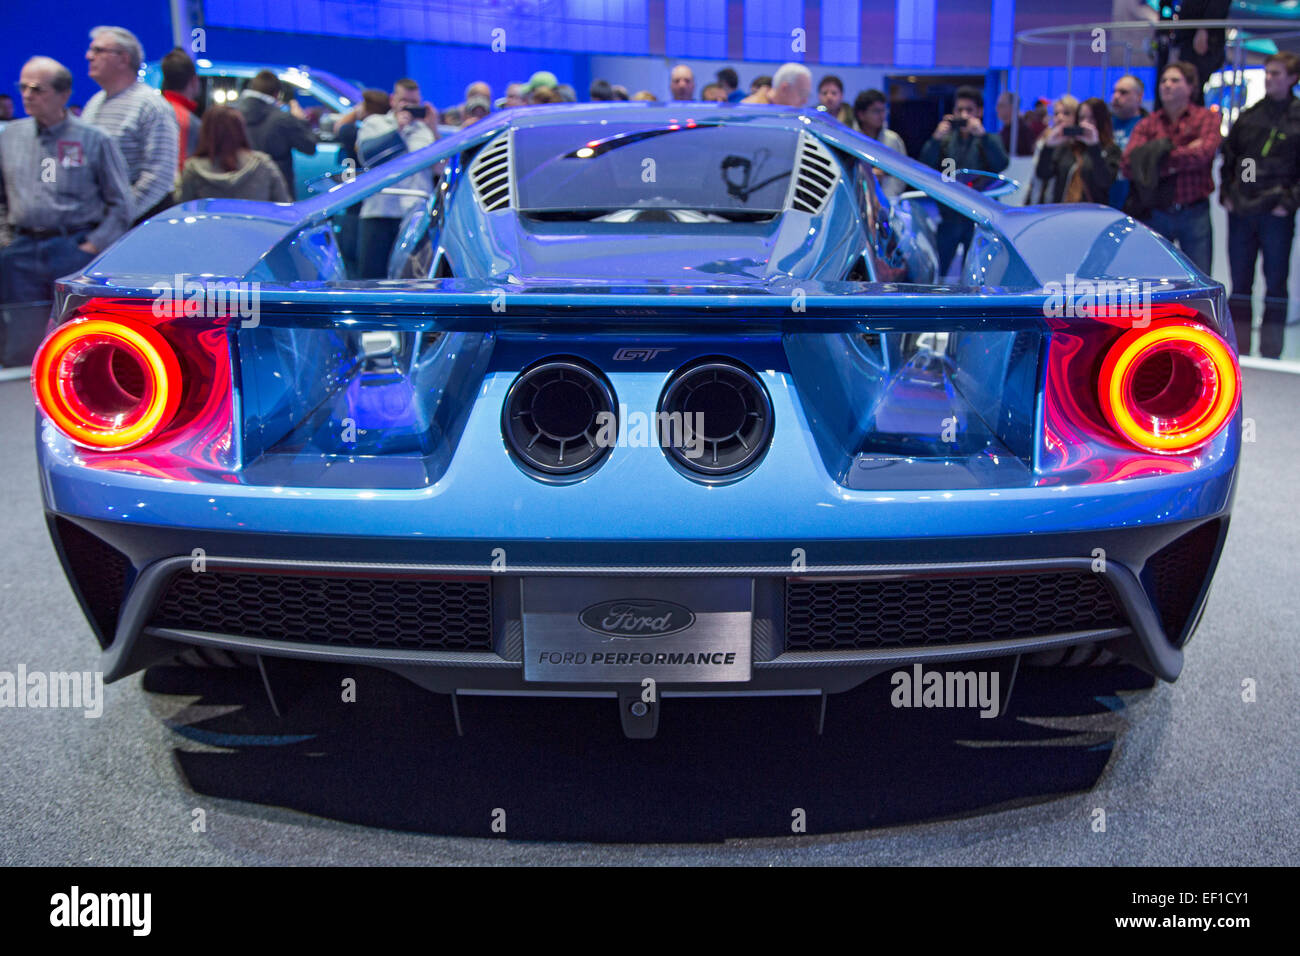 Detroit, Michigan - The 2016 carbon fiber Ford GT on display at the North American International Auto Show. Stock Photo